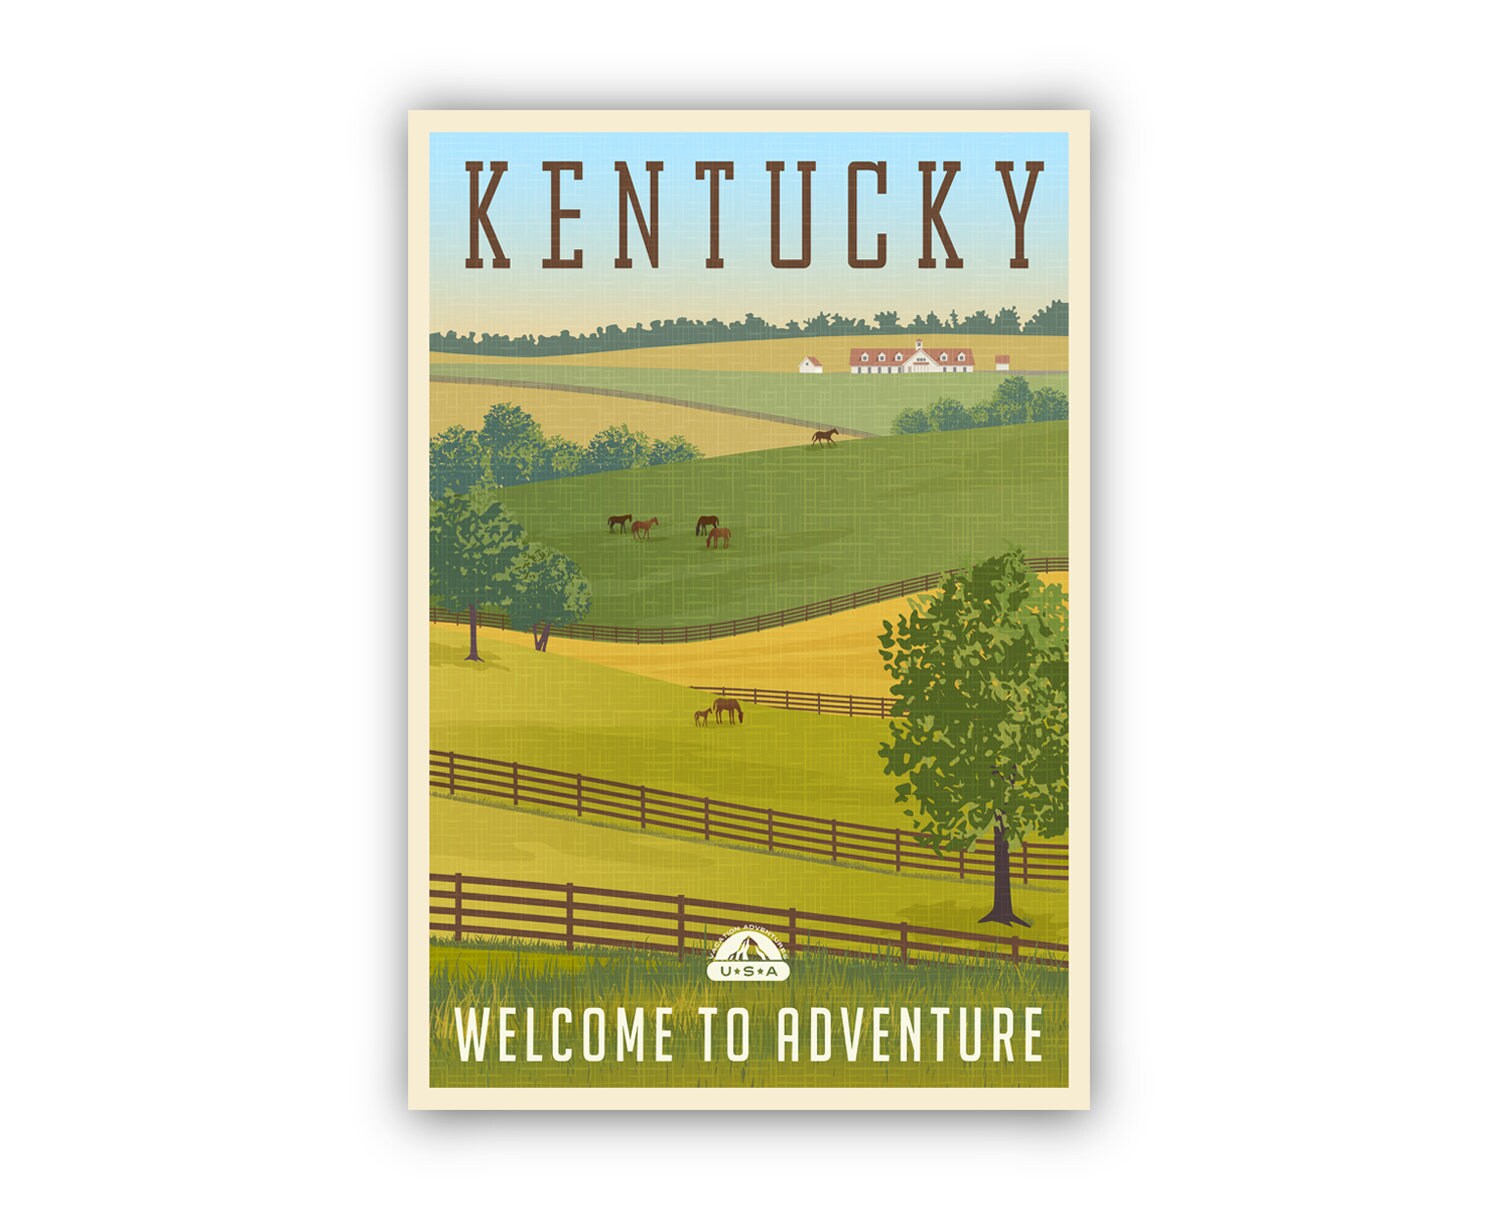 Kentucky Vintage Rustic Poster Print, Retro Style Travel Poster